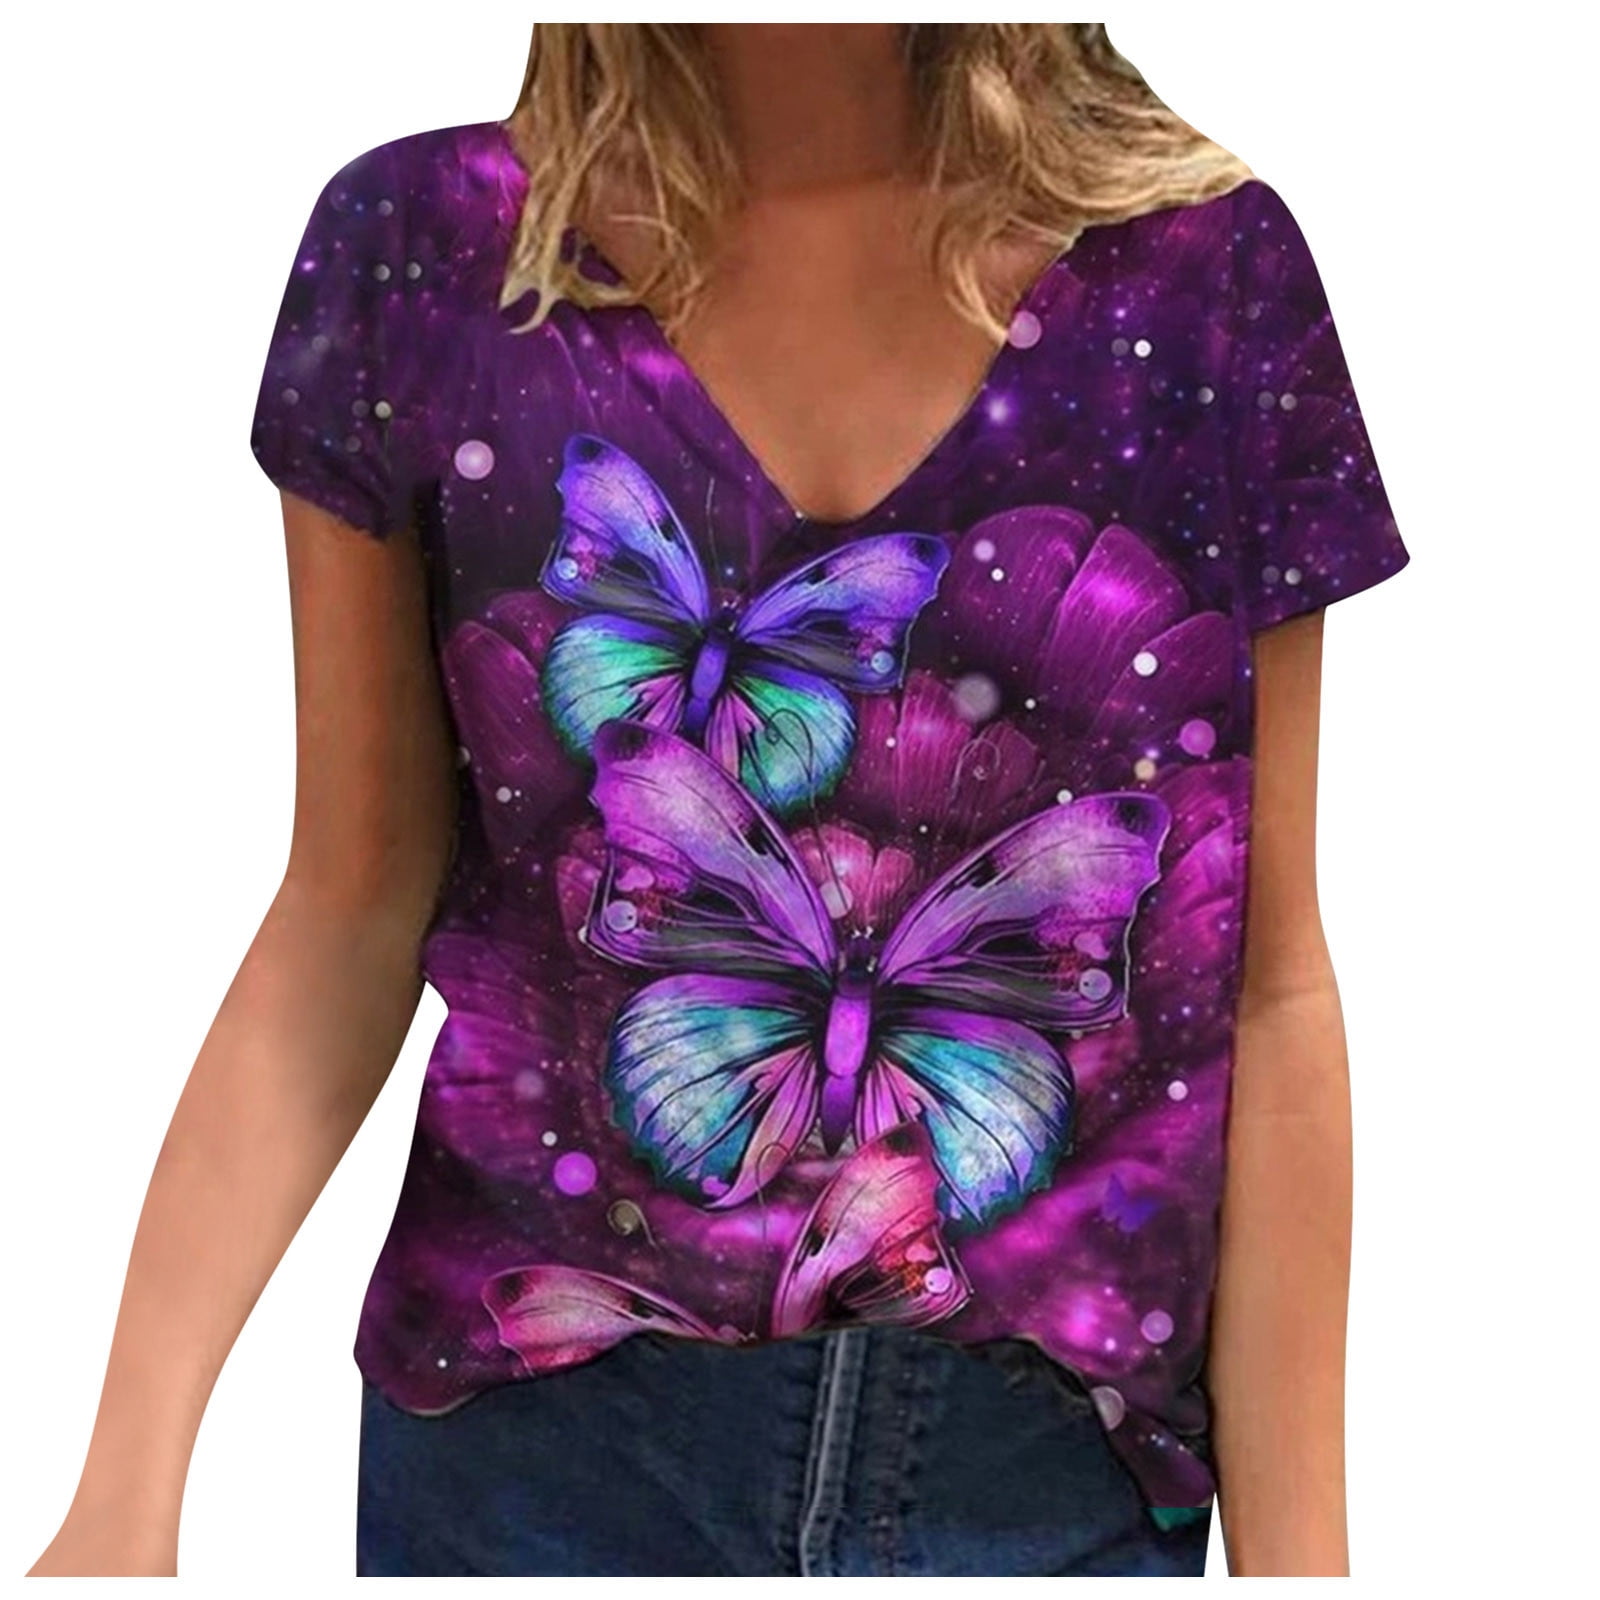 Womens Tops Graphic Tees 3D Butterfly Print T-Shirt Elegant Pullover Tee Tops Casual Blouse Spring Shirts 